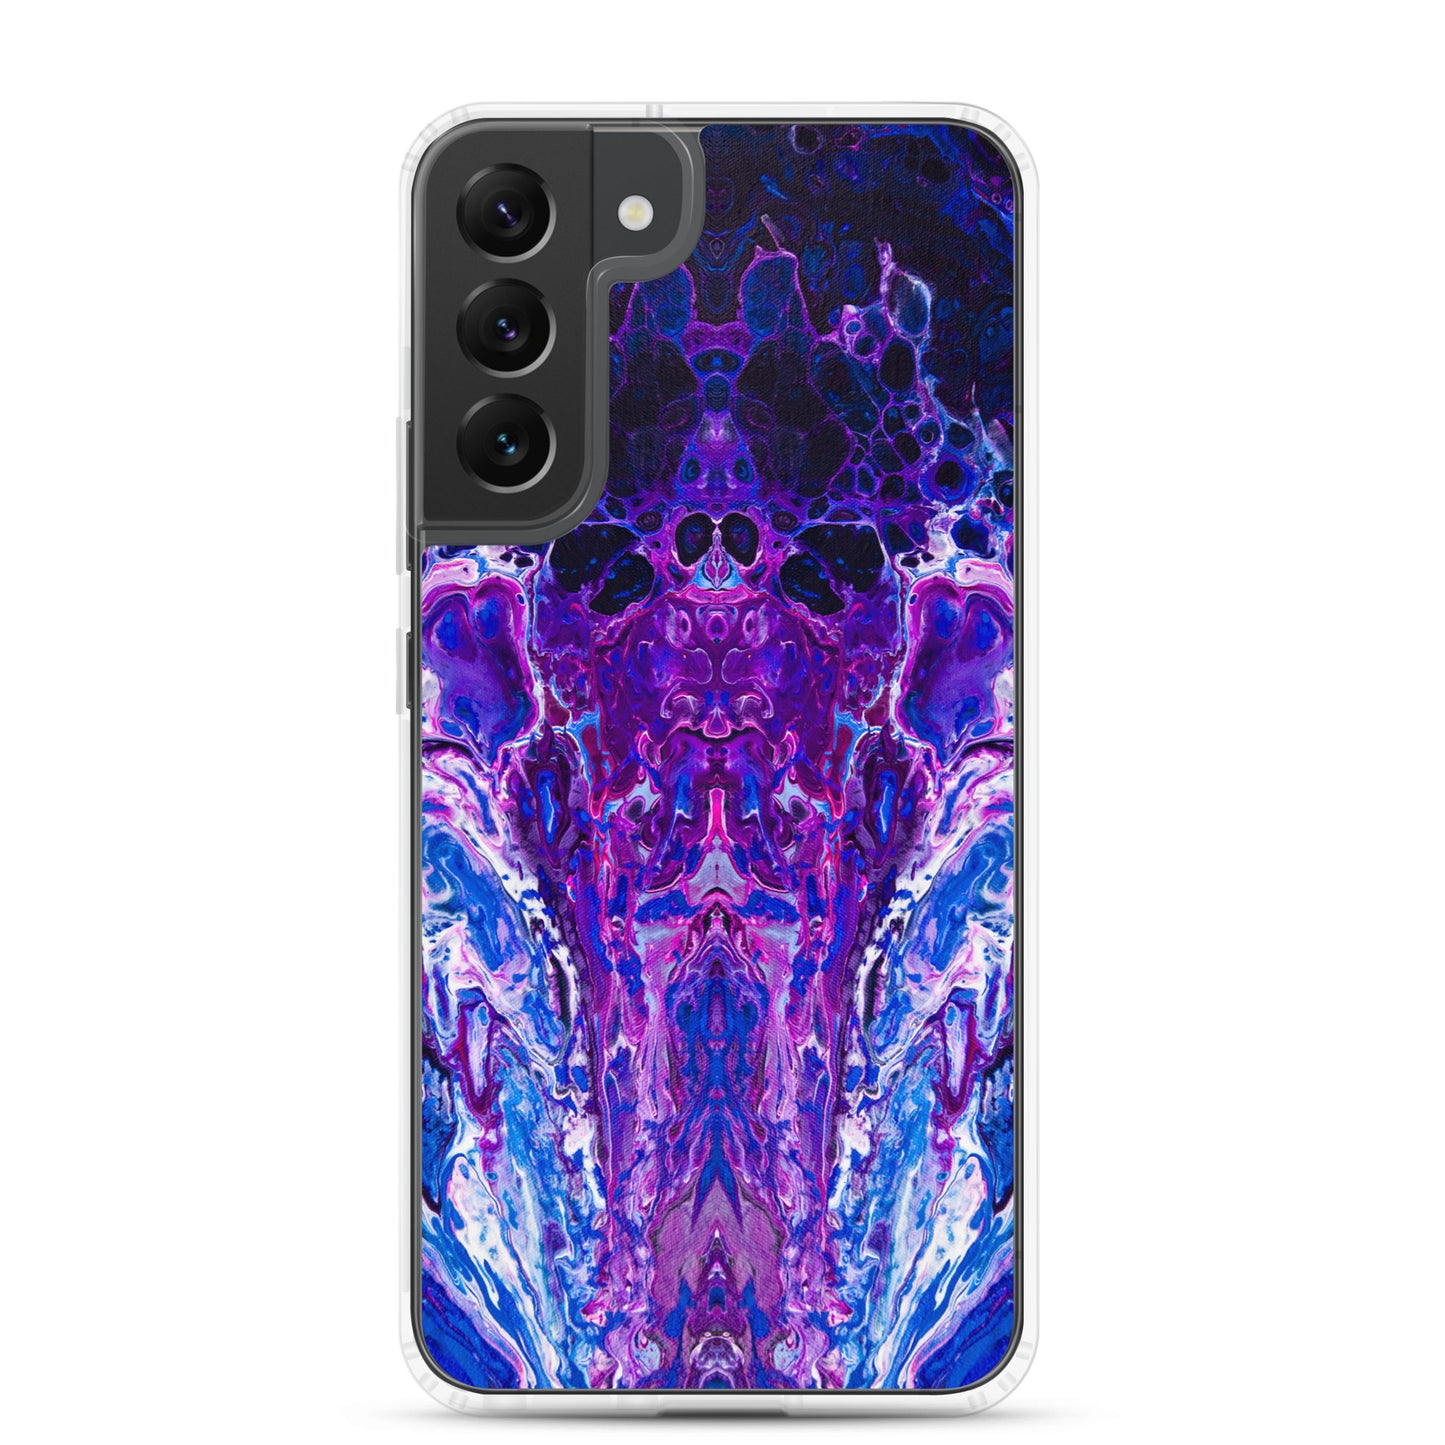 NightOwl Studio Custom Phone Case Compatible with Samsung Galaxy, Slim Cover for Wireless Charging, Drop and Scratch Resistant, Mauve Haze